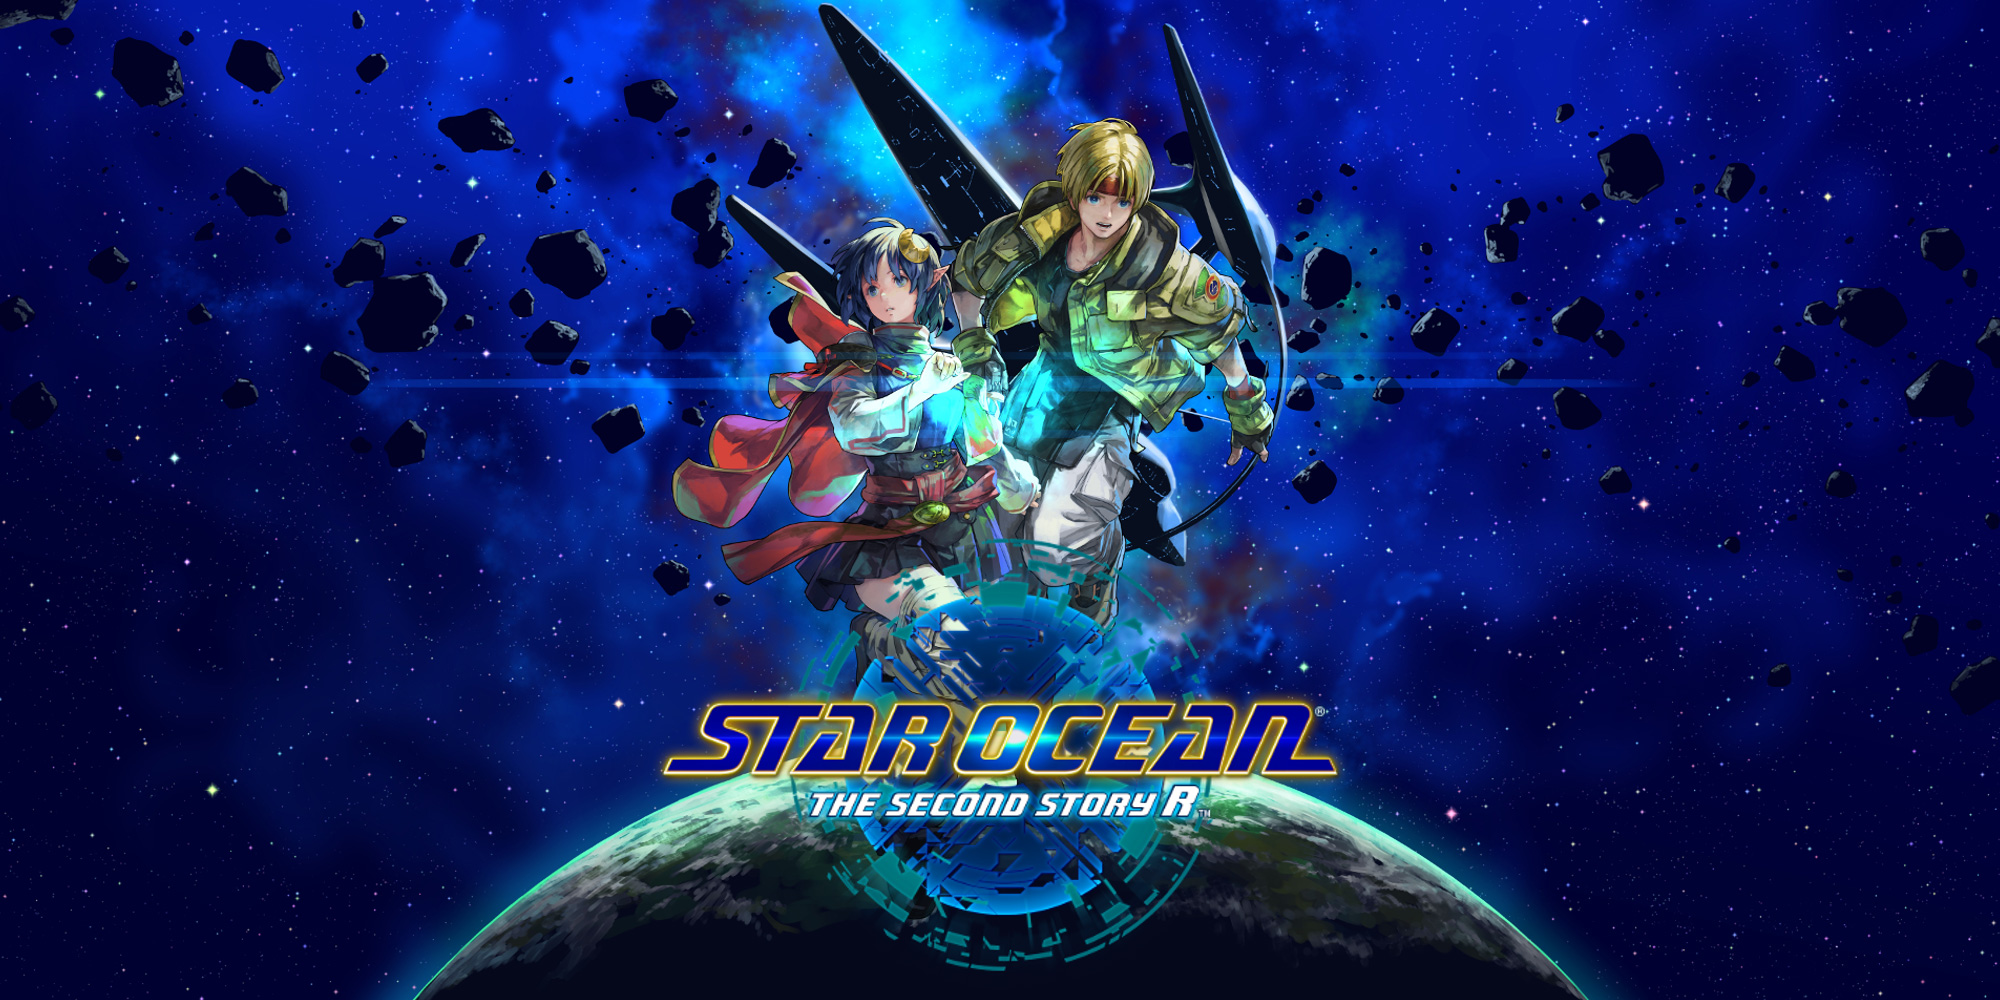 STAR OCEAN THE SECOND STORY R | Nintendo Switch games | Games | Nintendo